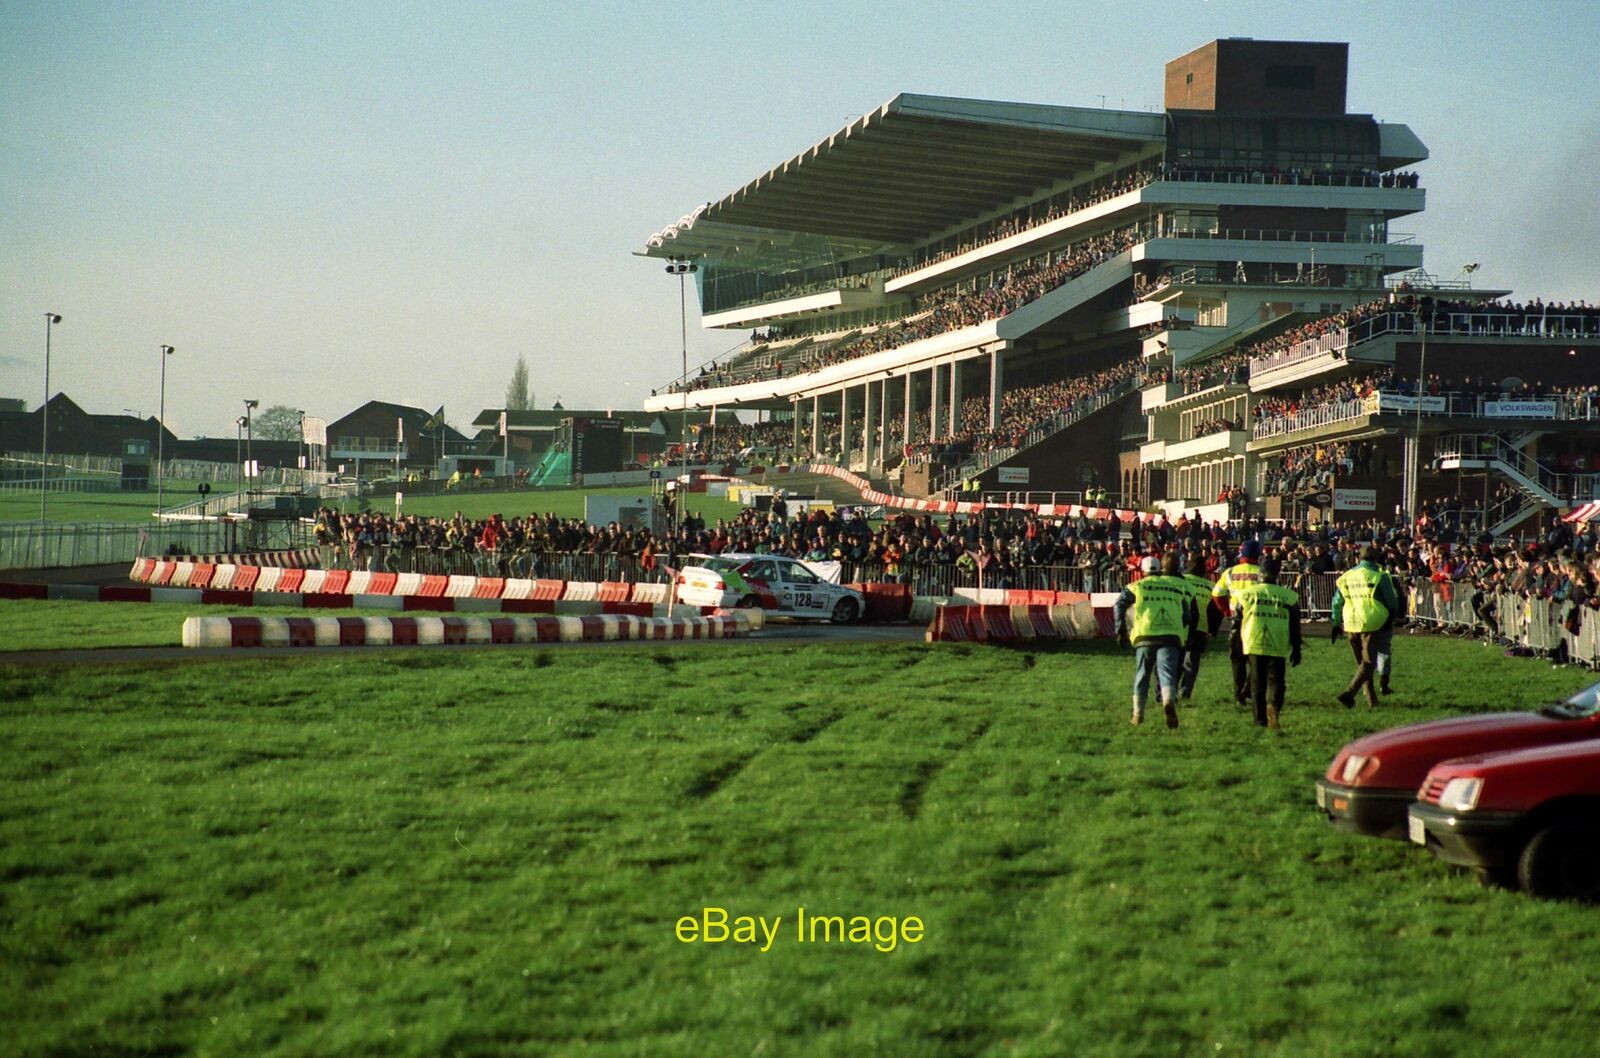 Photo 6x4 The Main Grandstand at Cheltenham Racecourse Taken at the 1998  c1998